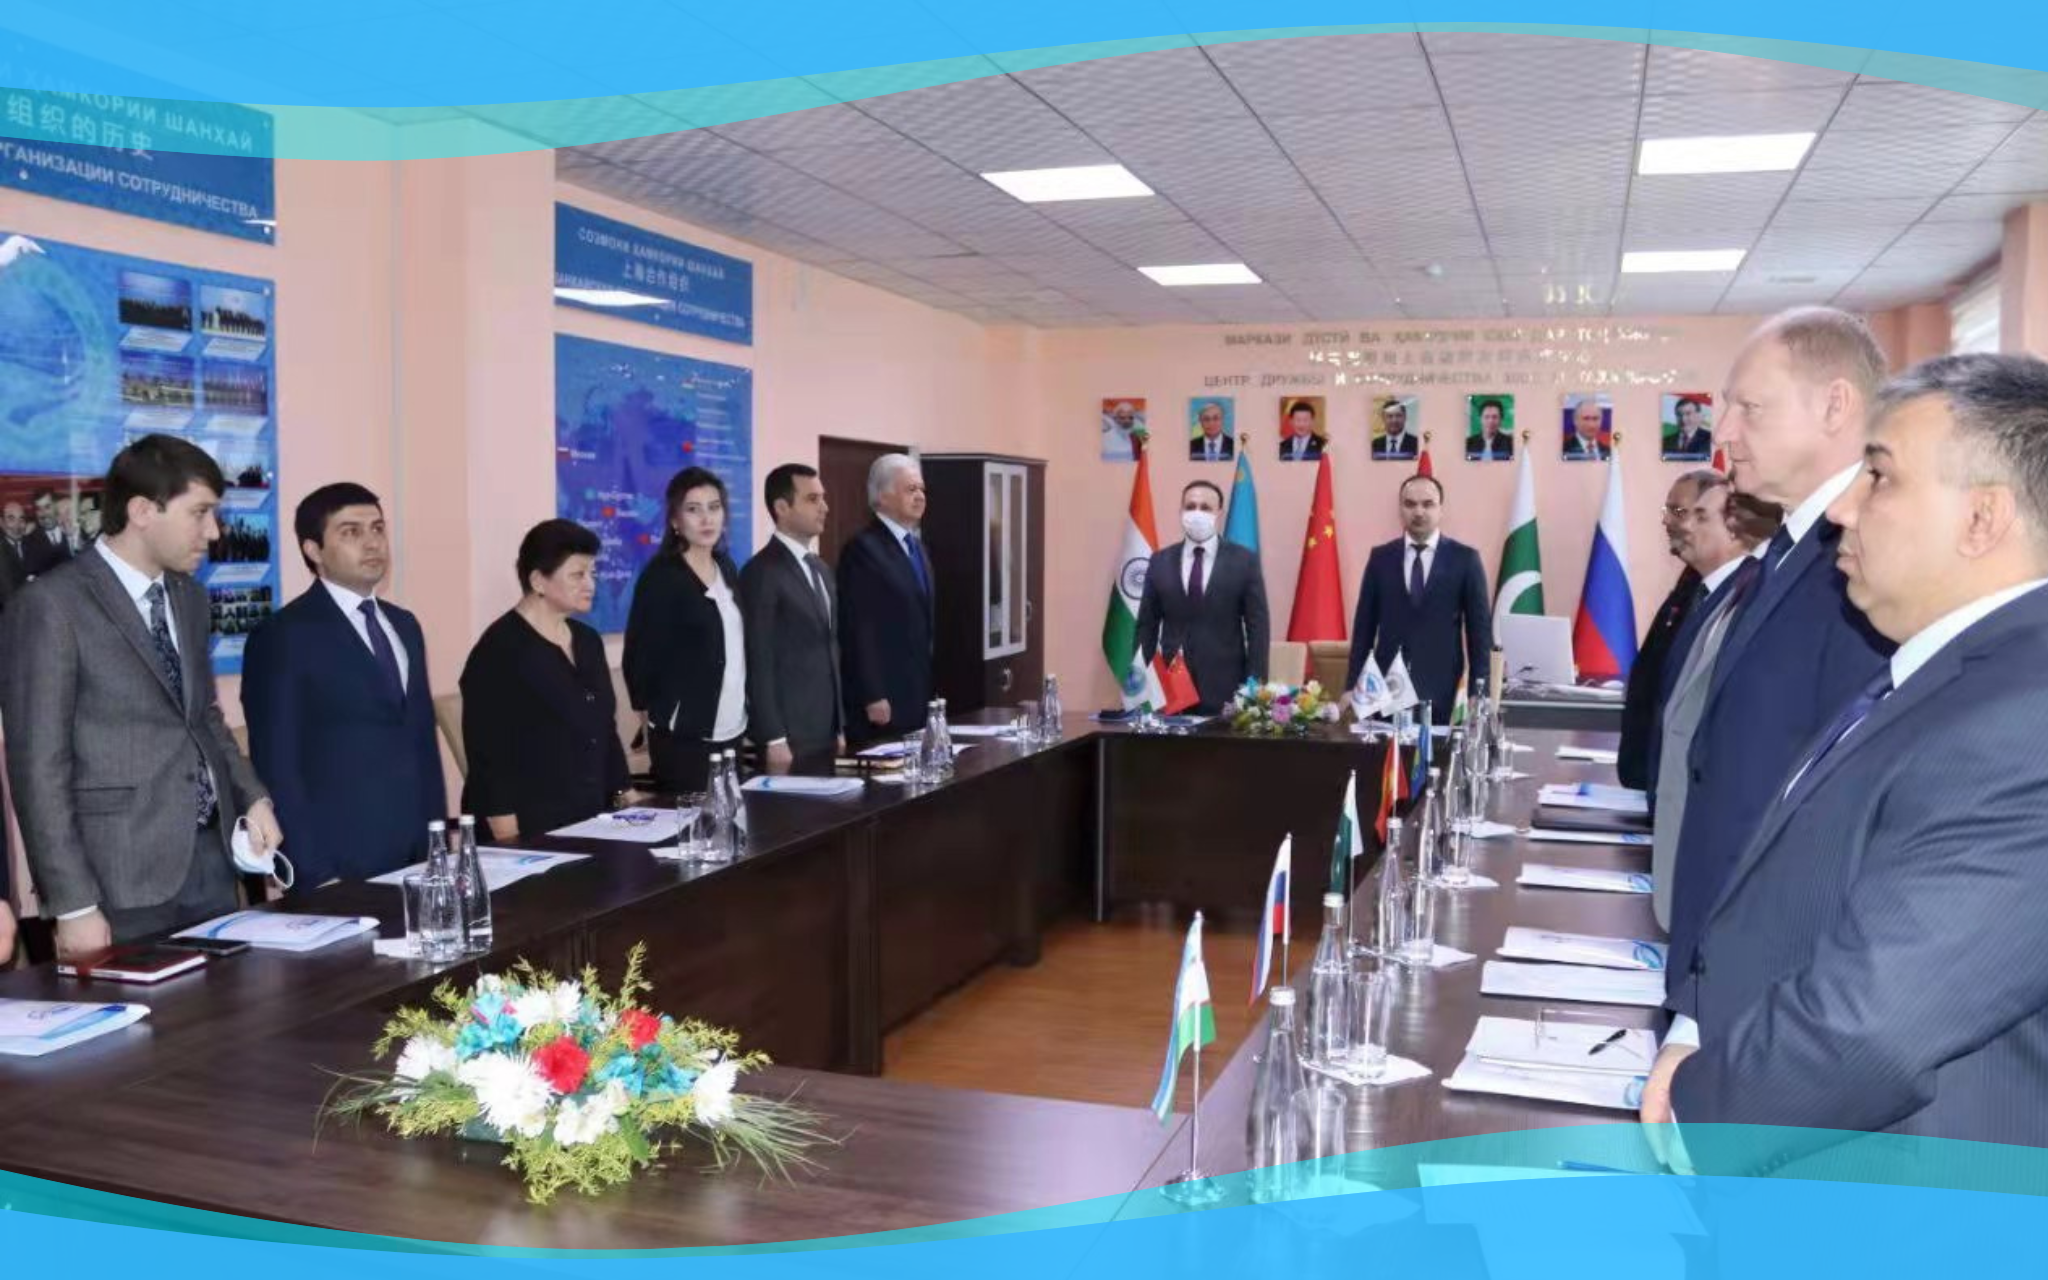 SCOLAR took part in the round table “SCO 2022: Implementing New Development Goals” in Tajikistan